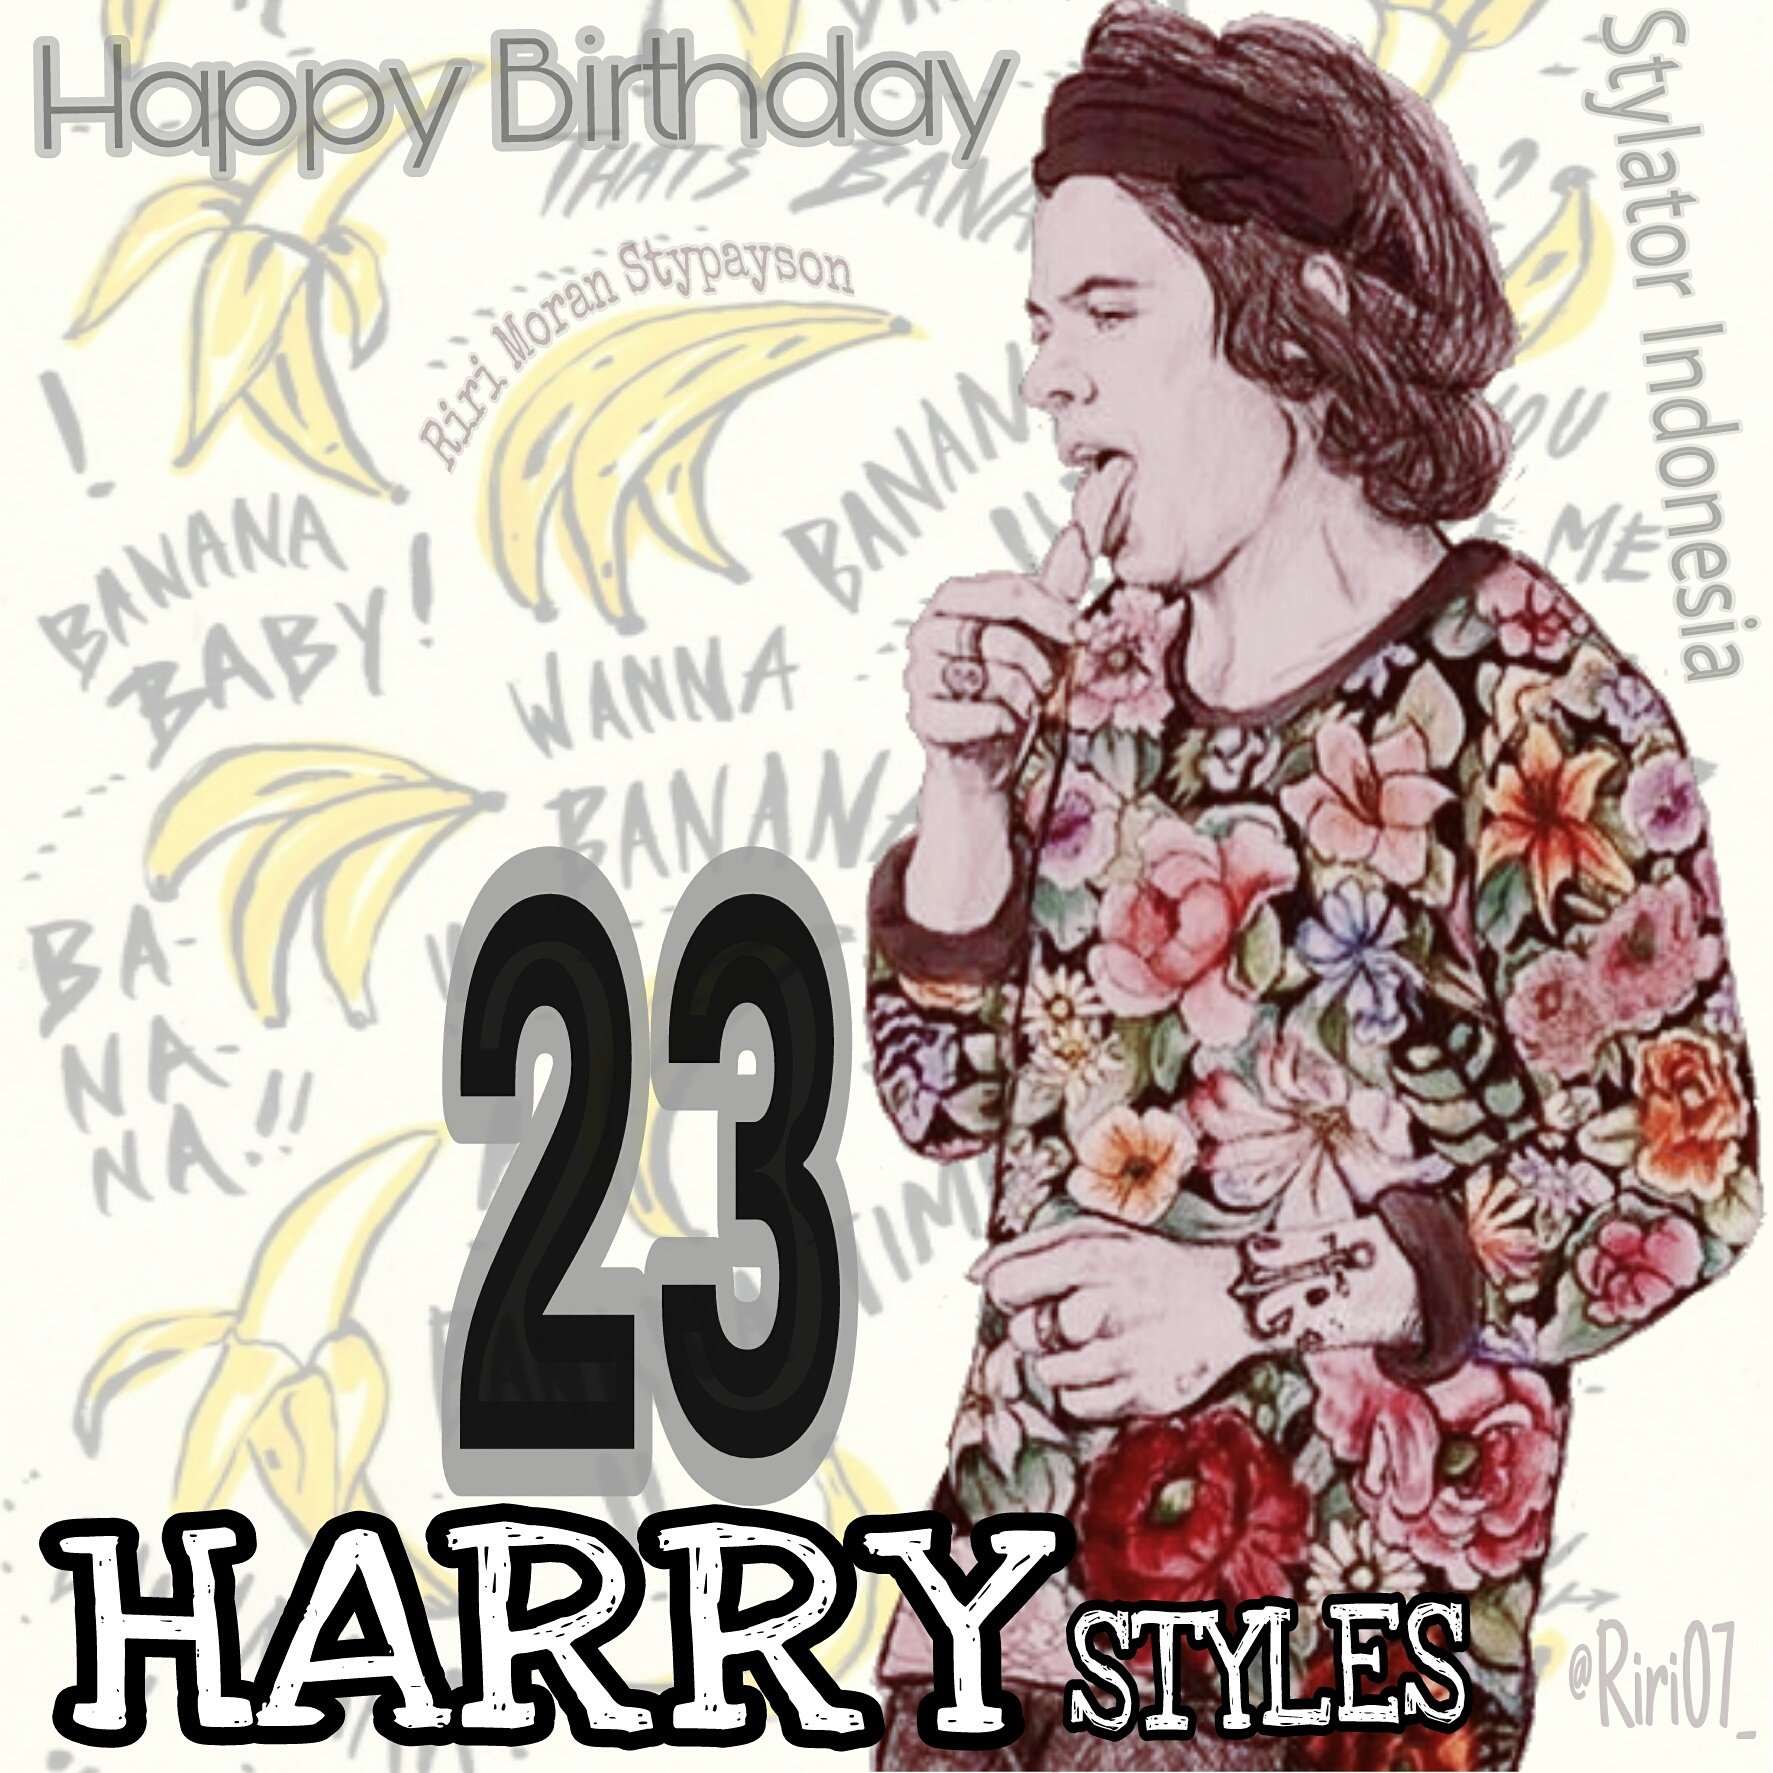 HAPPY BDAY HARRY, Mr. Bananas  have a wonderful day. All the love. H 